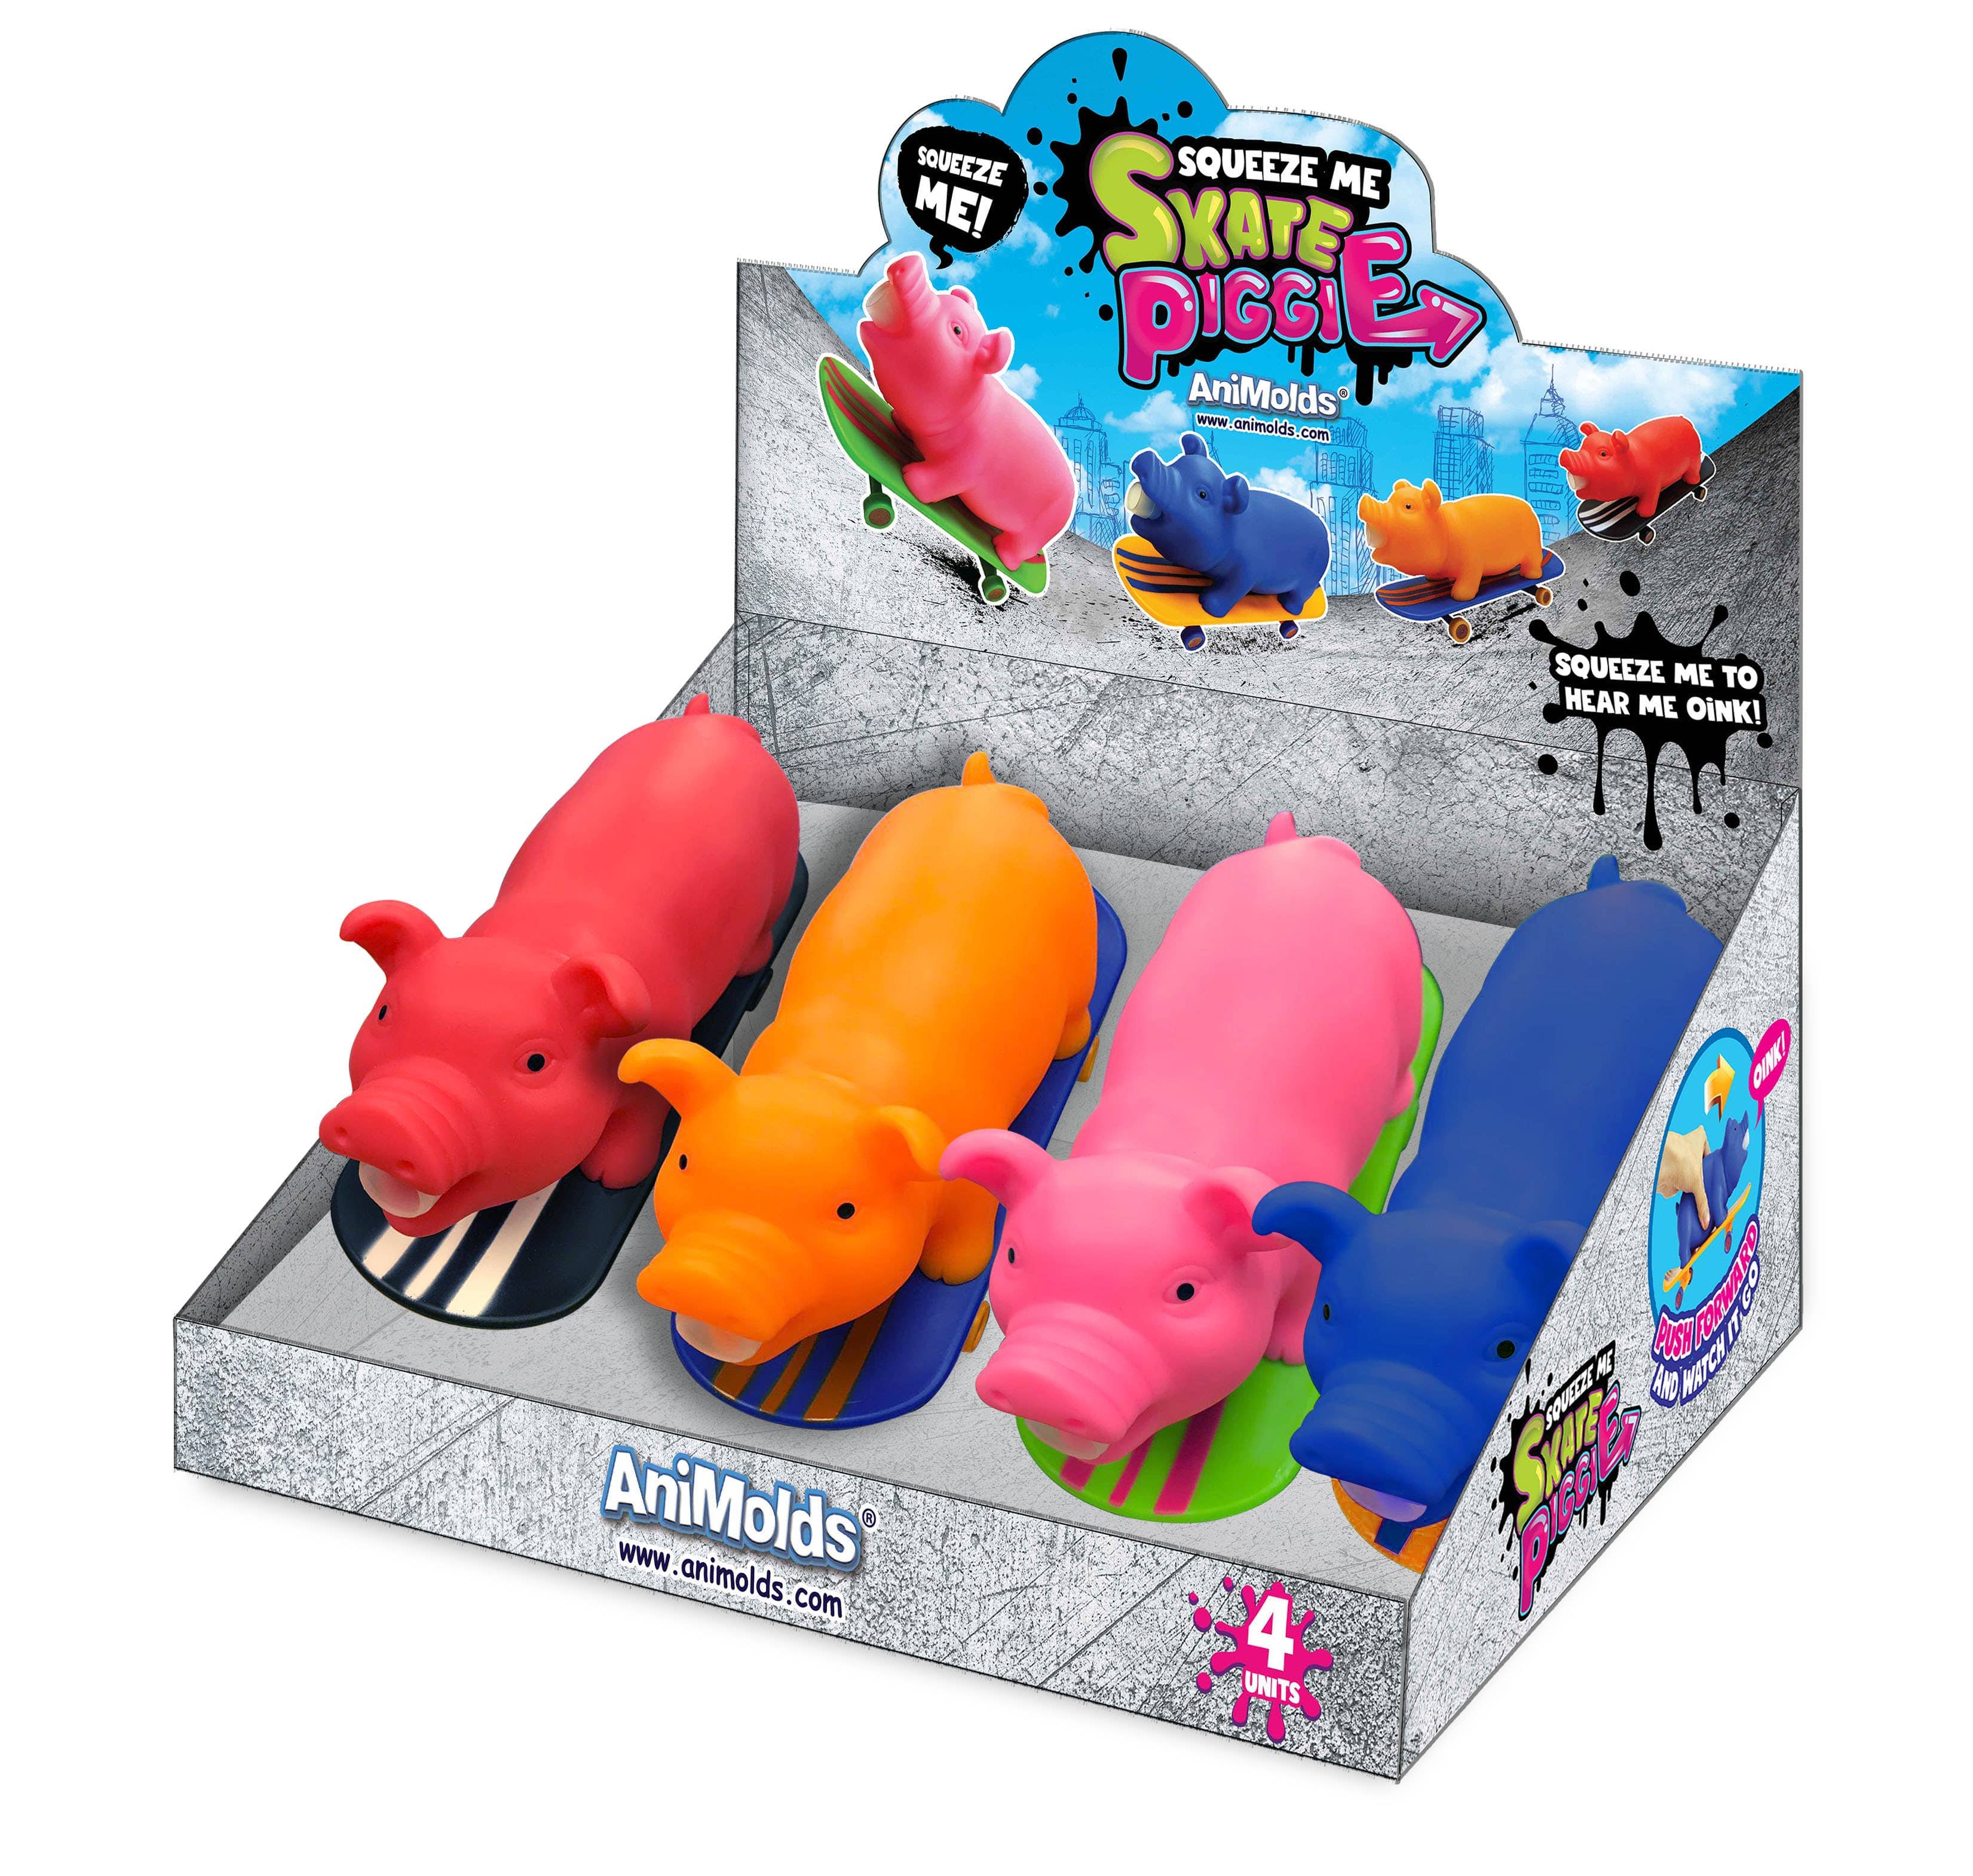 Squeeze Me Skating Piggy Toy for Kids - The Pink Pigs, A Compassionate Boutique